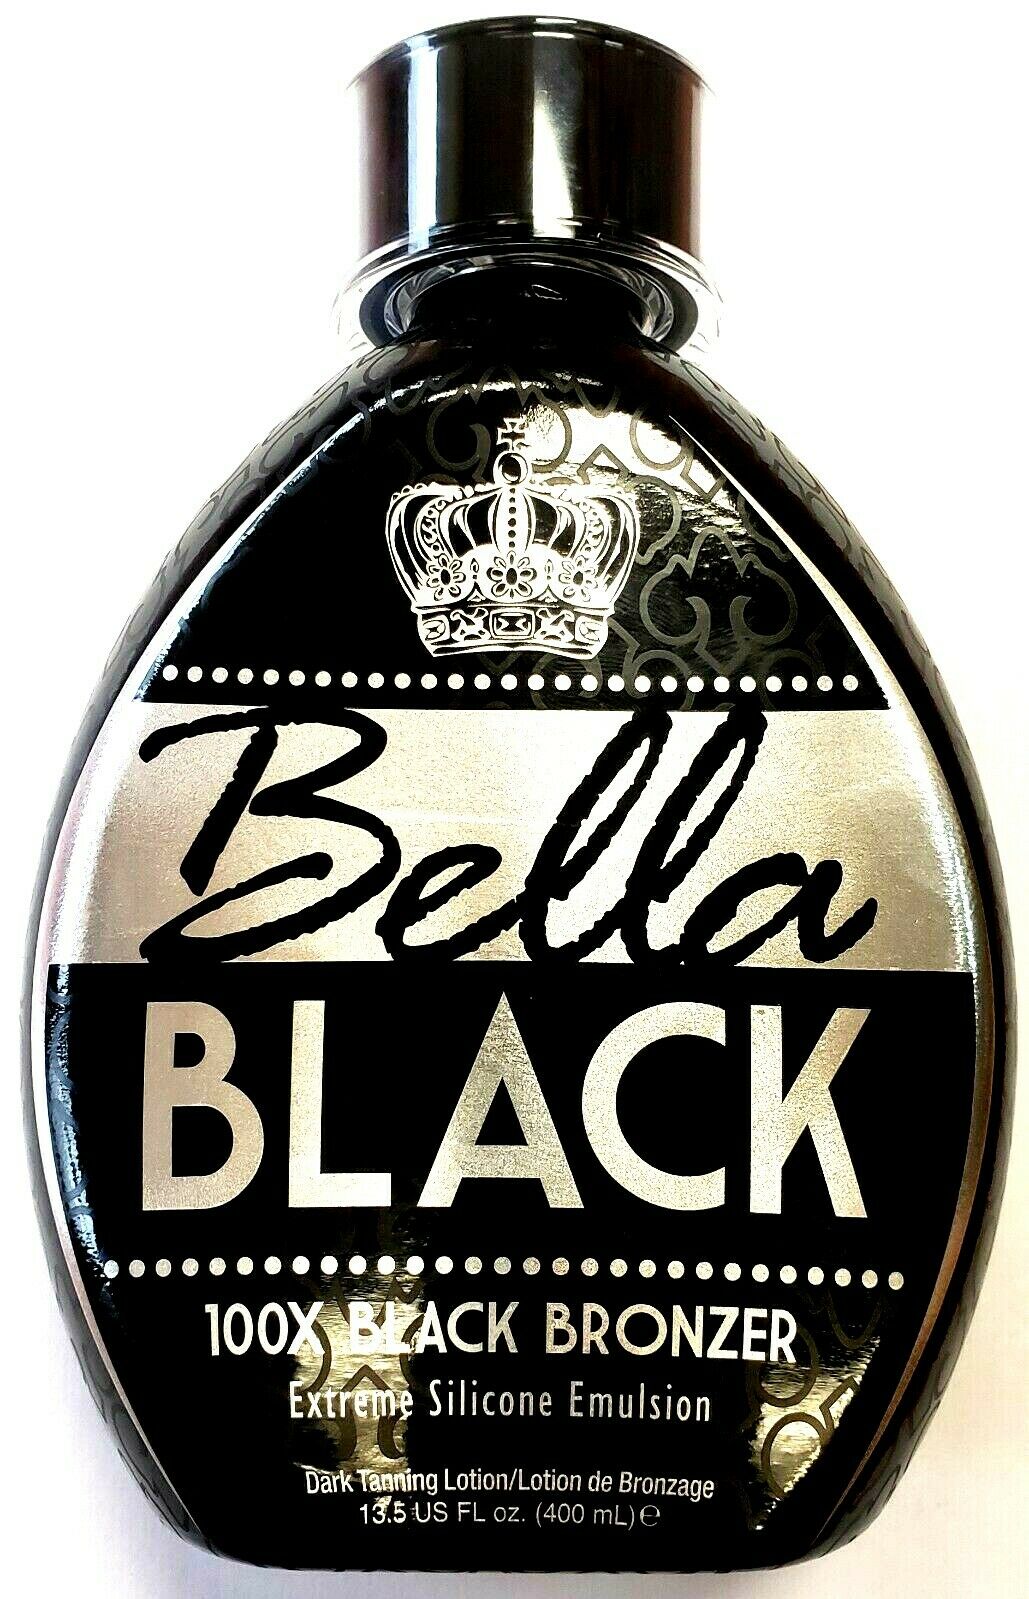 Bella Black 100X Black Bronzer Extreme Silicone Tanning Lotion By Dolce Vita Tan - image 2 of 2